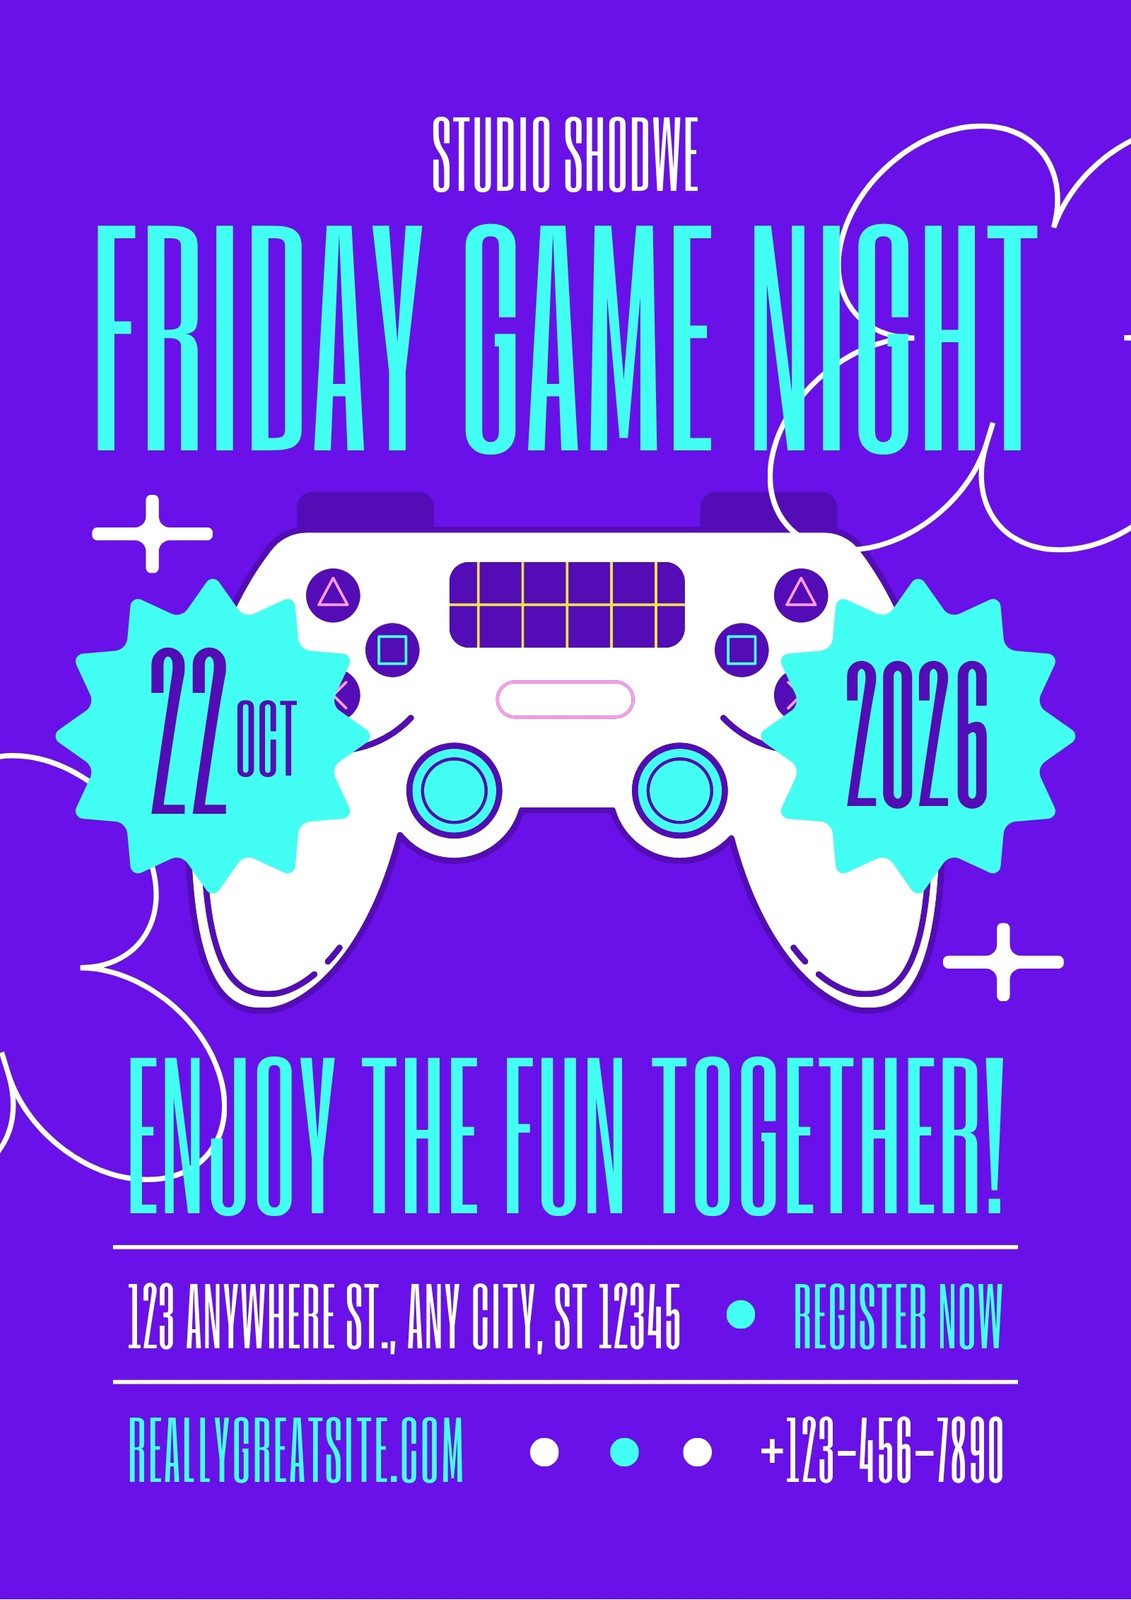 Free game night poster templates to edit and print